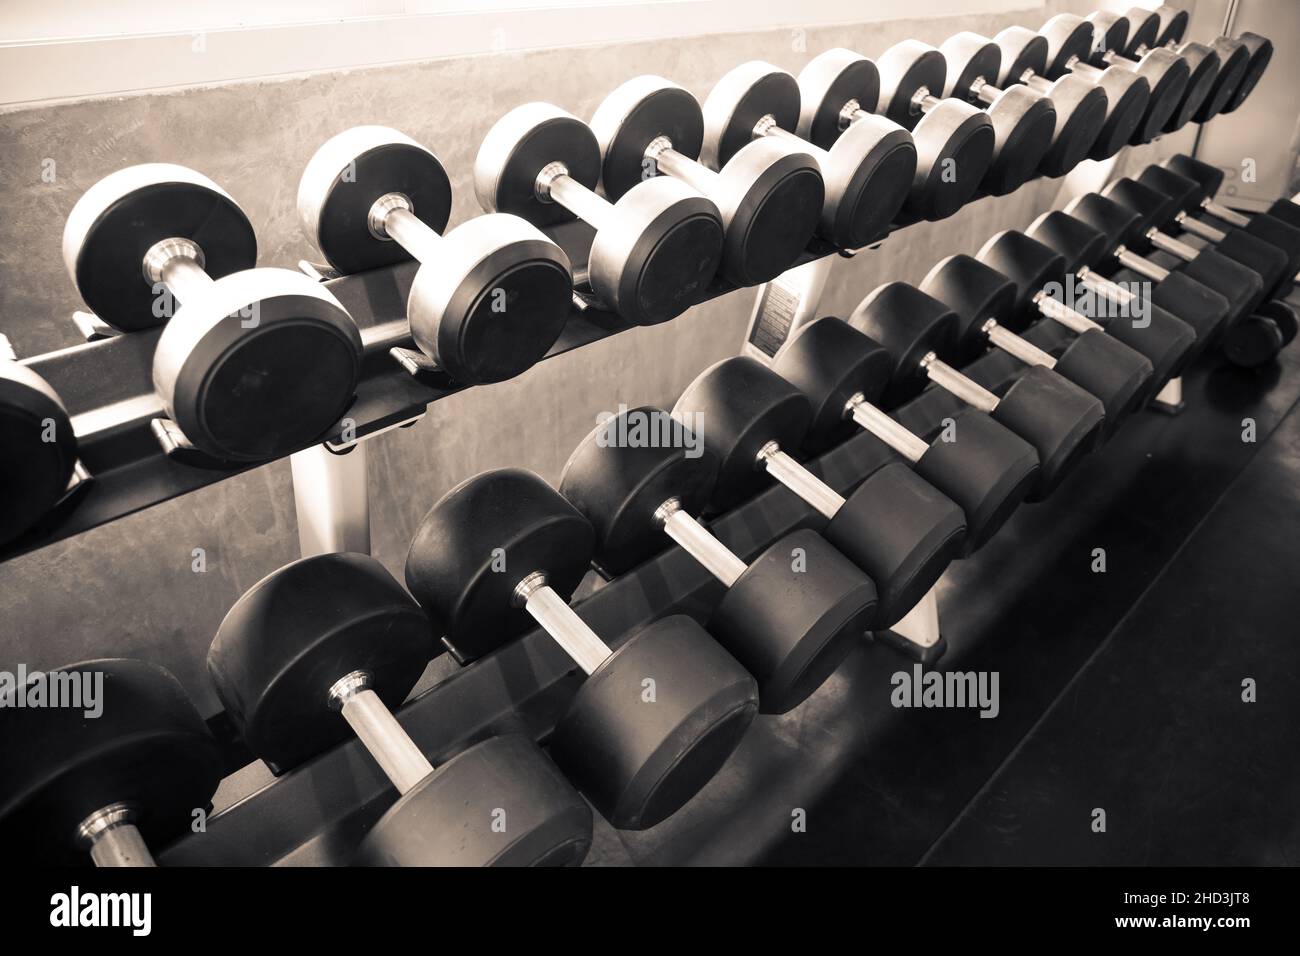 Dumbbells are on the shelves of the gym. Modern of gym interior with equipment. Sports equipment in the gym. Stock Photo